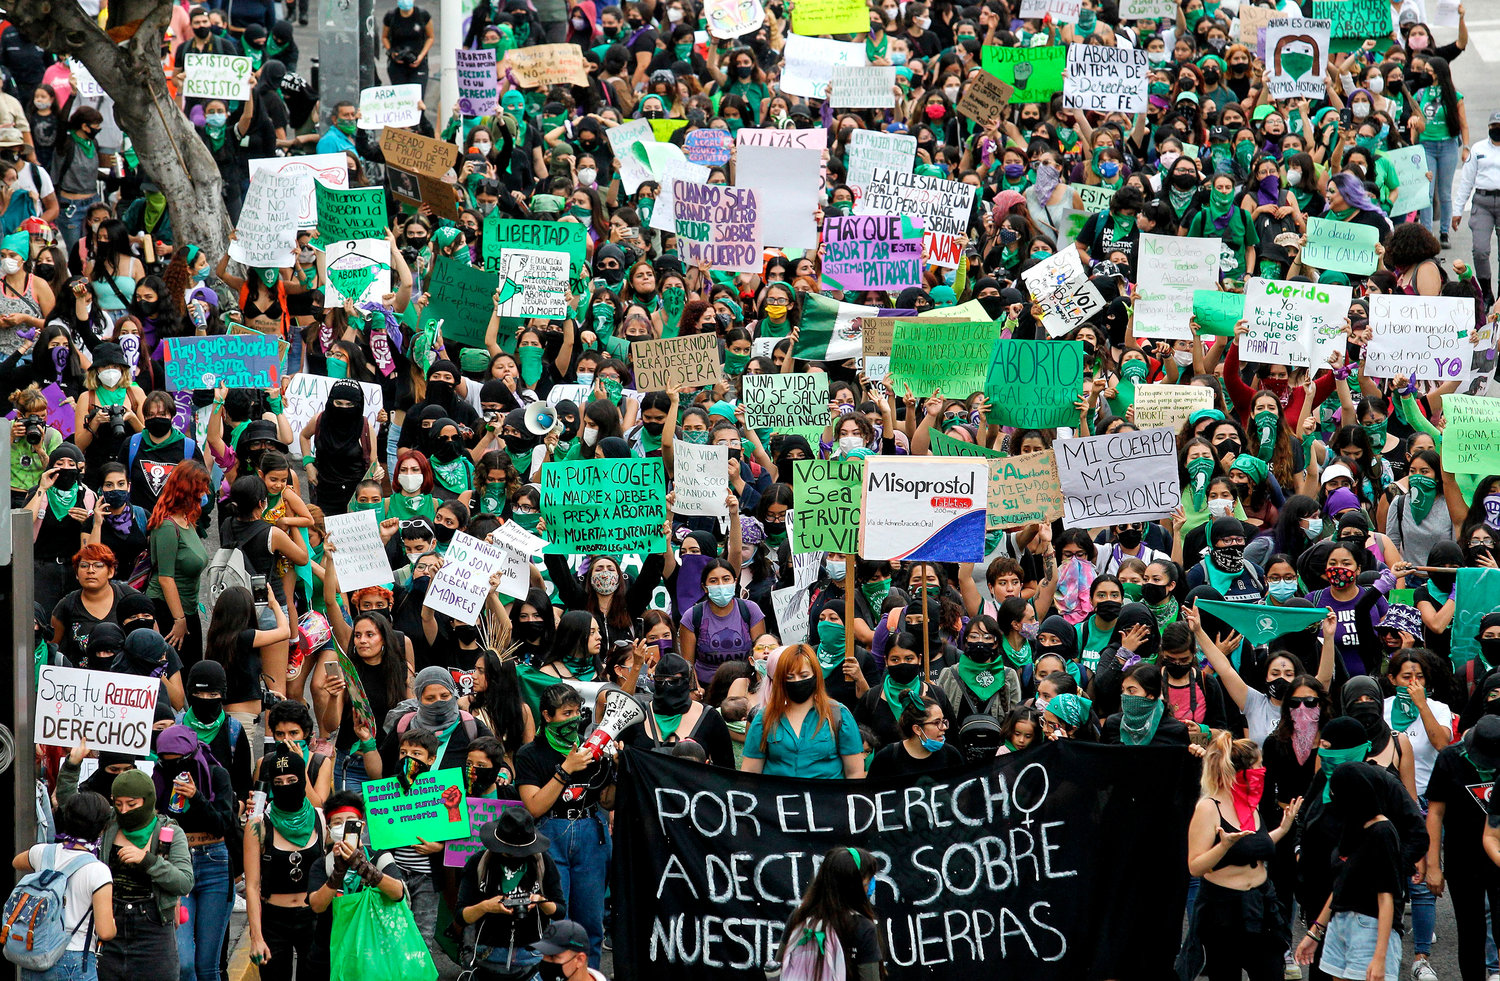 Supporters of the legalization of abortion take part in a demonstration in the framework of the International Safe Abortion Day, in Guadalajara, Mexico on September 28, 2020. (Ulises Ruiz/AFP/Getty Images/TNS)